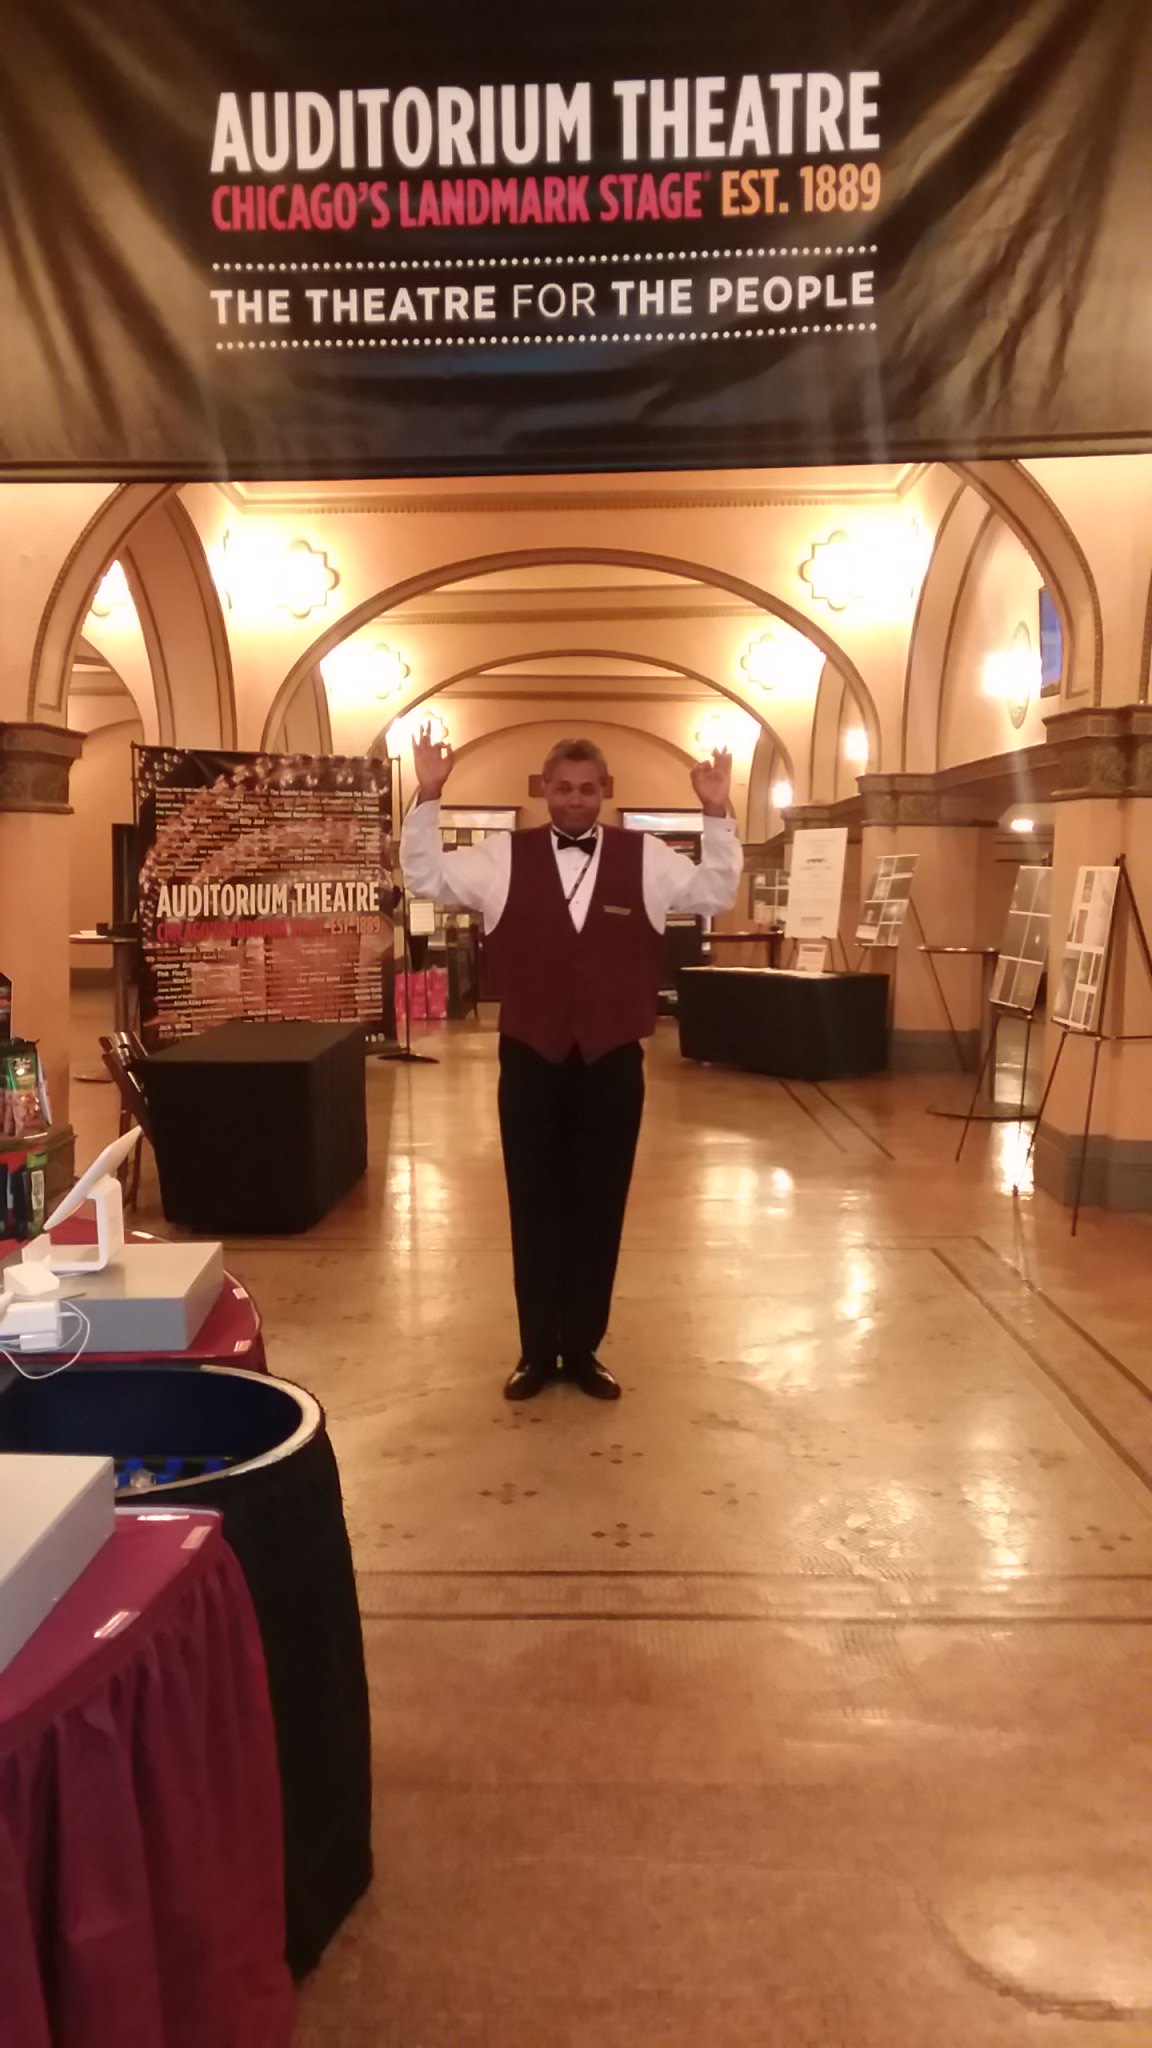 4th Most Favorite Day Gig Ever: For Darryl Maximilian Robinson, who enjoys great architecture, it occurred in 2018 when he served in Guest Services at the historic Auditorium Theatre of Chicago.